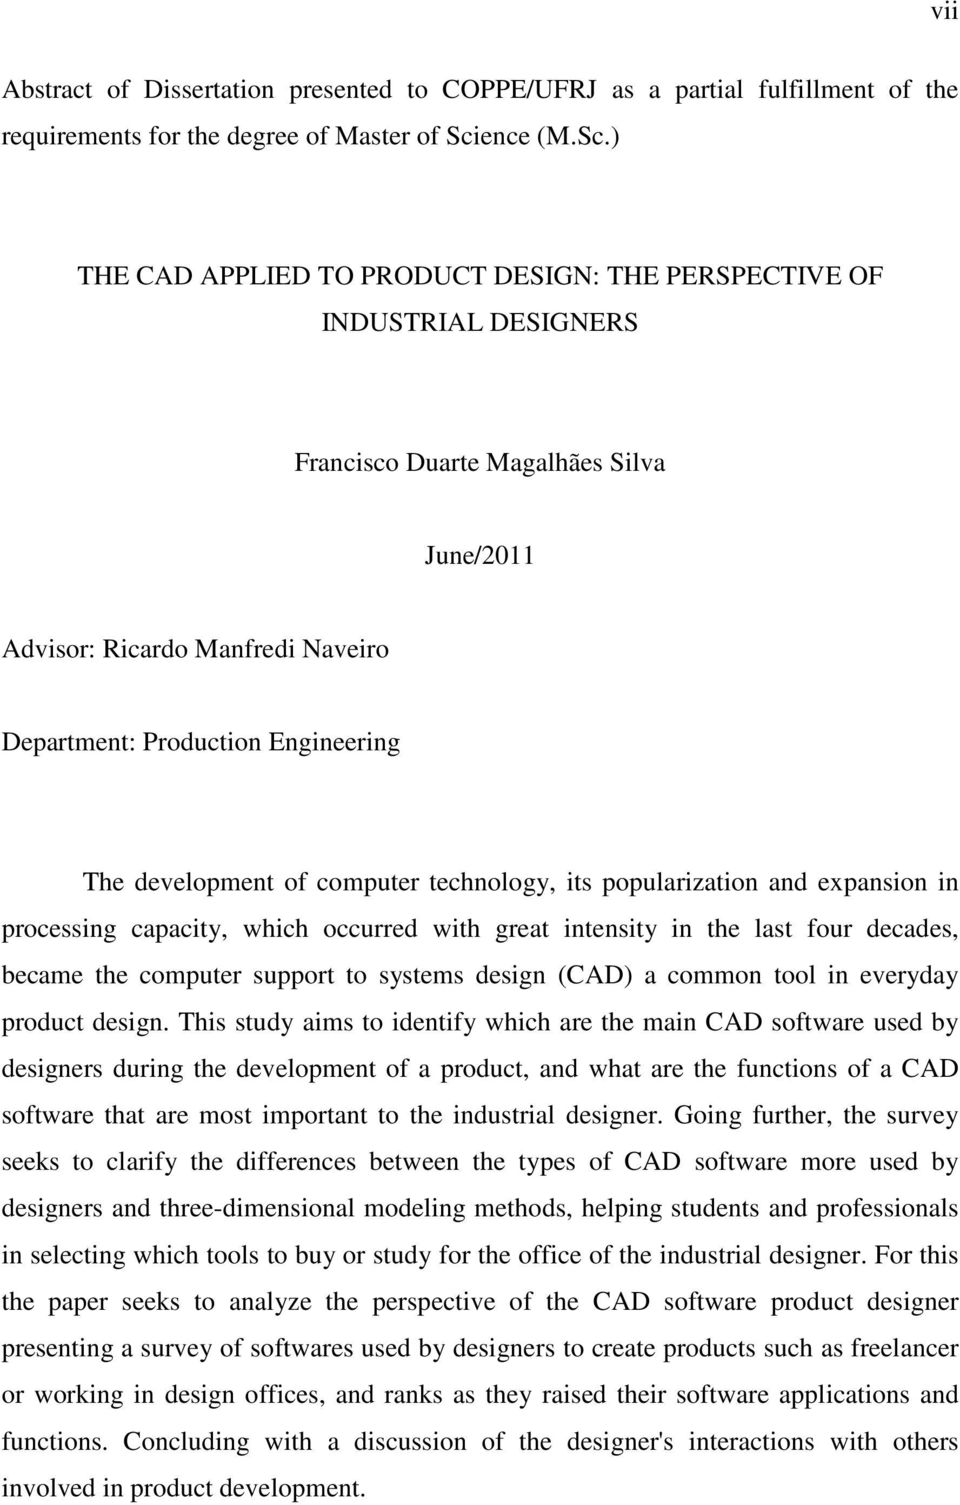 ) THE CAD APPLIED TO PRODUCT DESIGN: THE PERSPECTIVE OF INDUSTRIAL DESIGNERS Francisco Duarte Magalhães Silva June/2011 Advisor: Ricardo Manfredi Naveiro Department: Production Engineering The